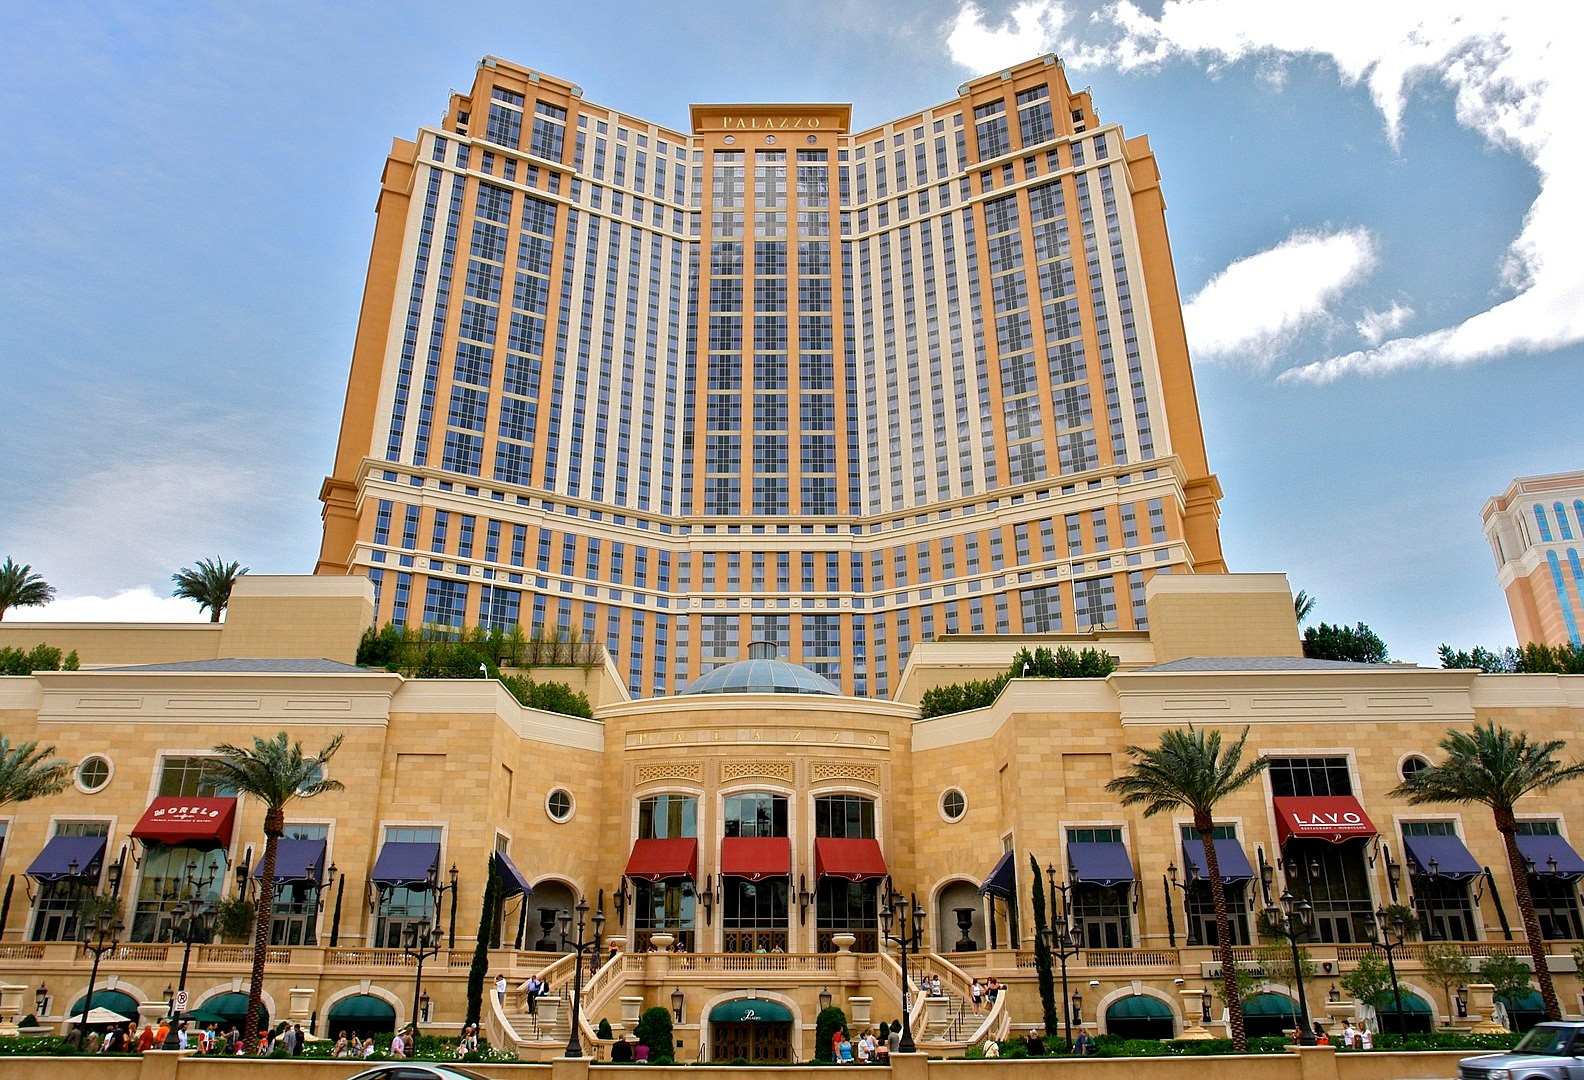 By Alex Proimos from Sydney, Australia - Palazzo Casino, Las Vegas, CC BY 2.0, https://commons.wikimedia.org/w/index.php?curid=25651662